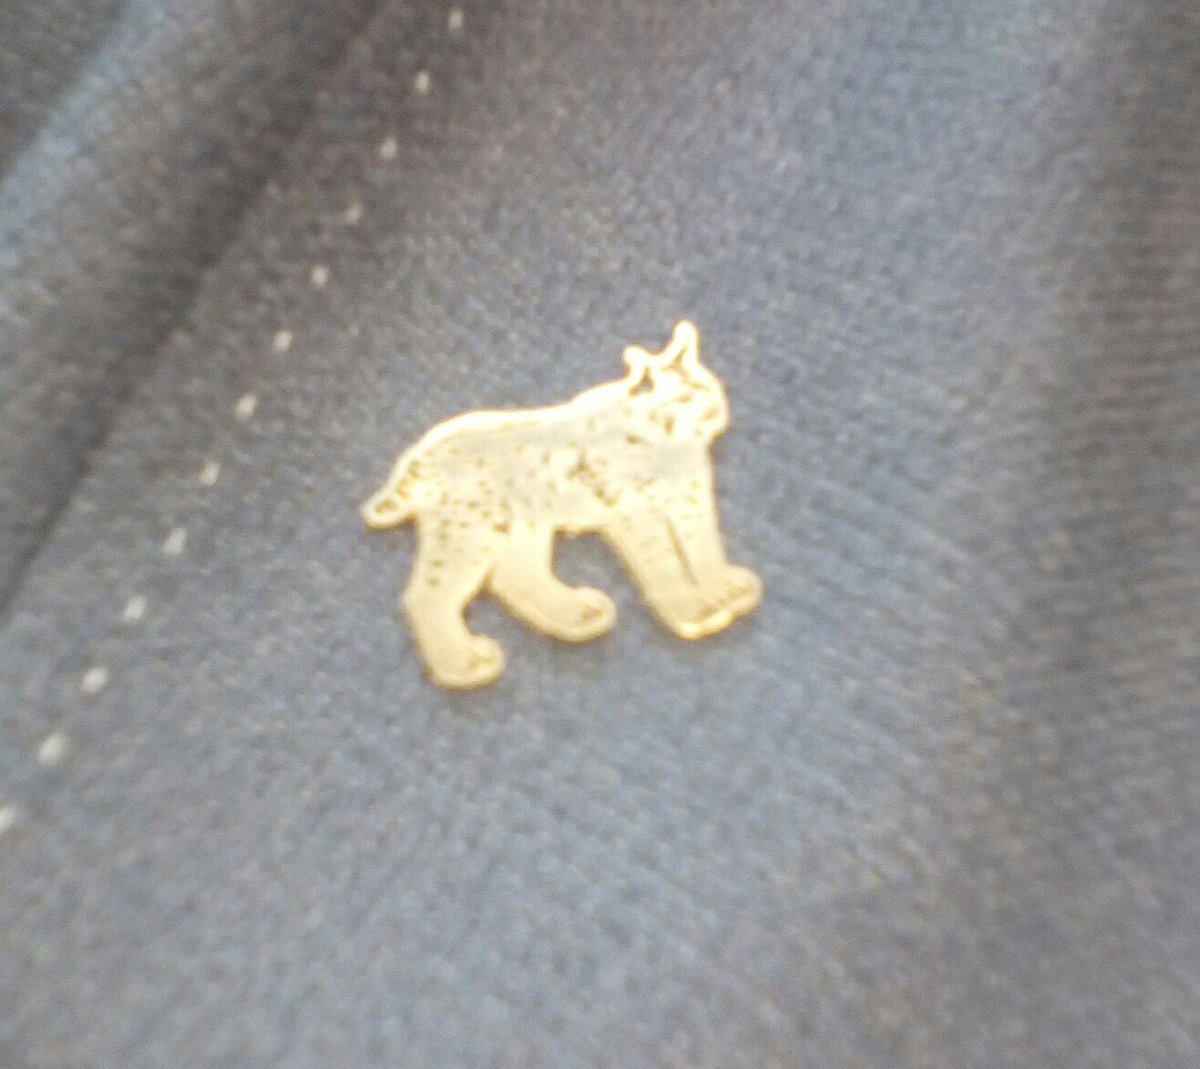 Important day for the #Balkan #lynx @ #BernConvention meeting in #Strasbourg 
Everybody is wearing the pin!